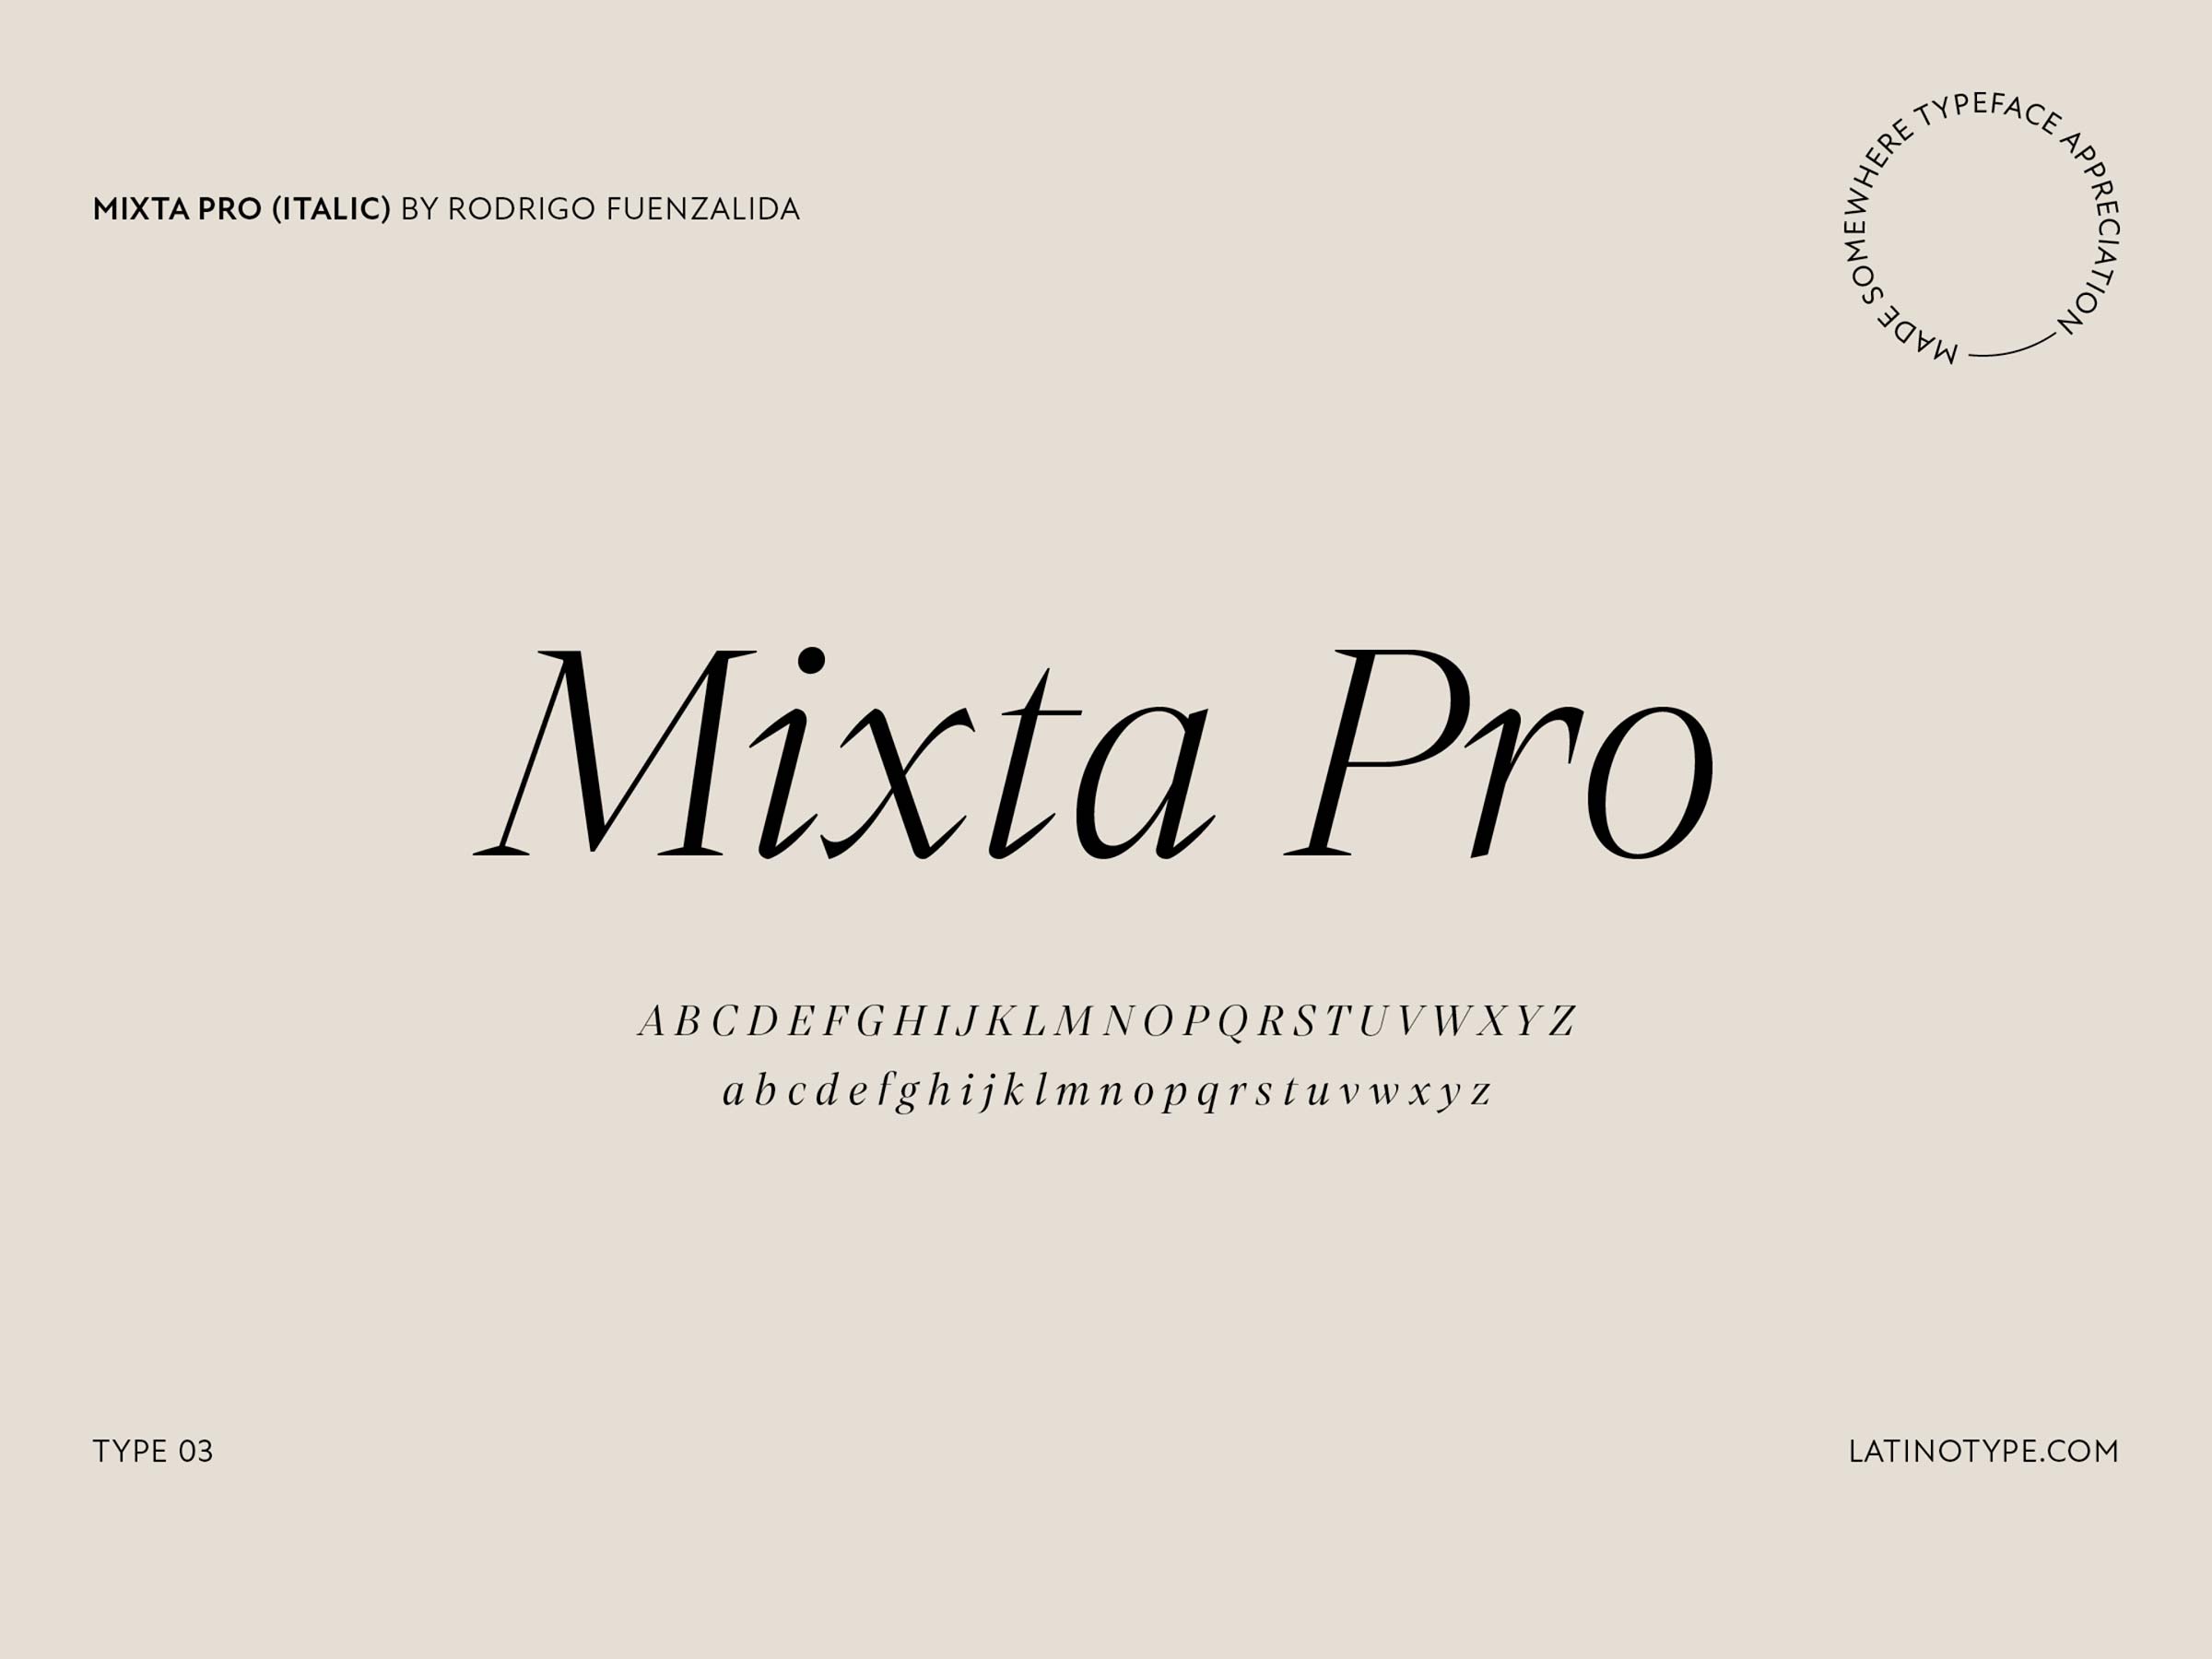 Made-Somewhere-Blog-Post-Type Alert: Trending Typefaces and Type Styles 06 Mixta Pro